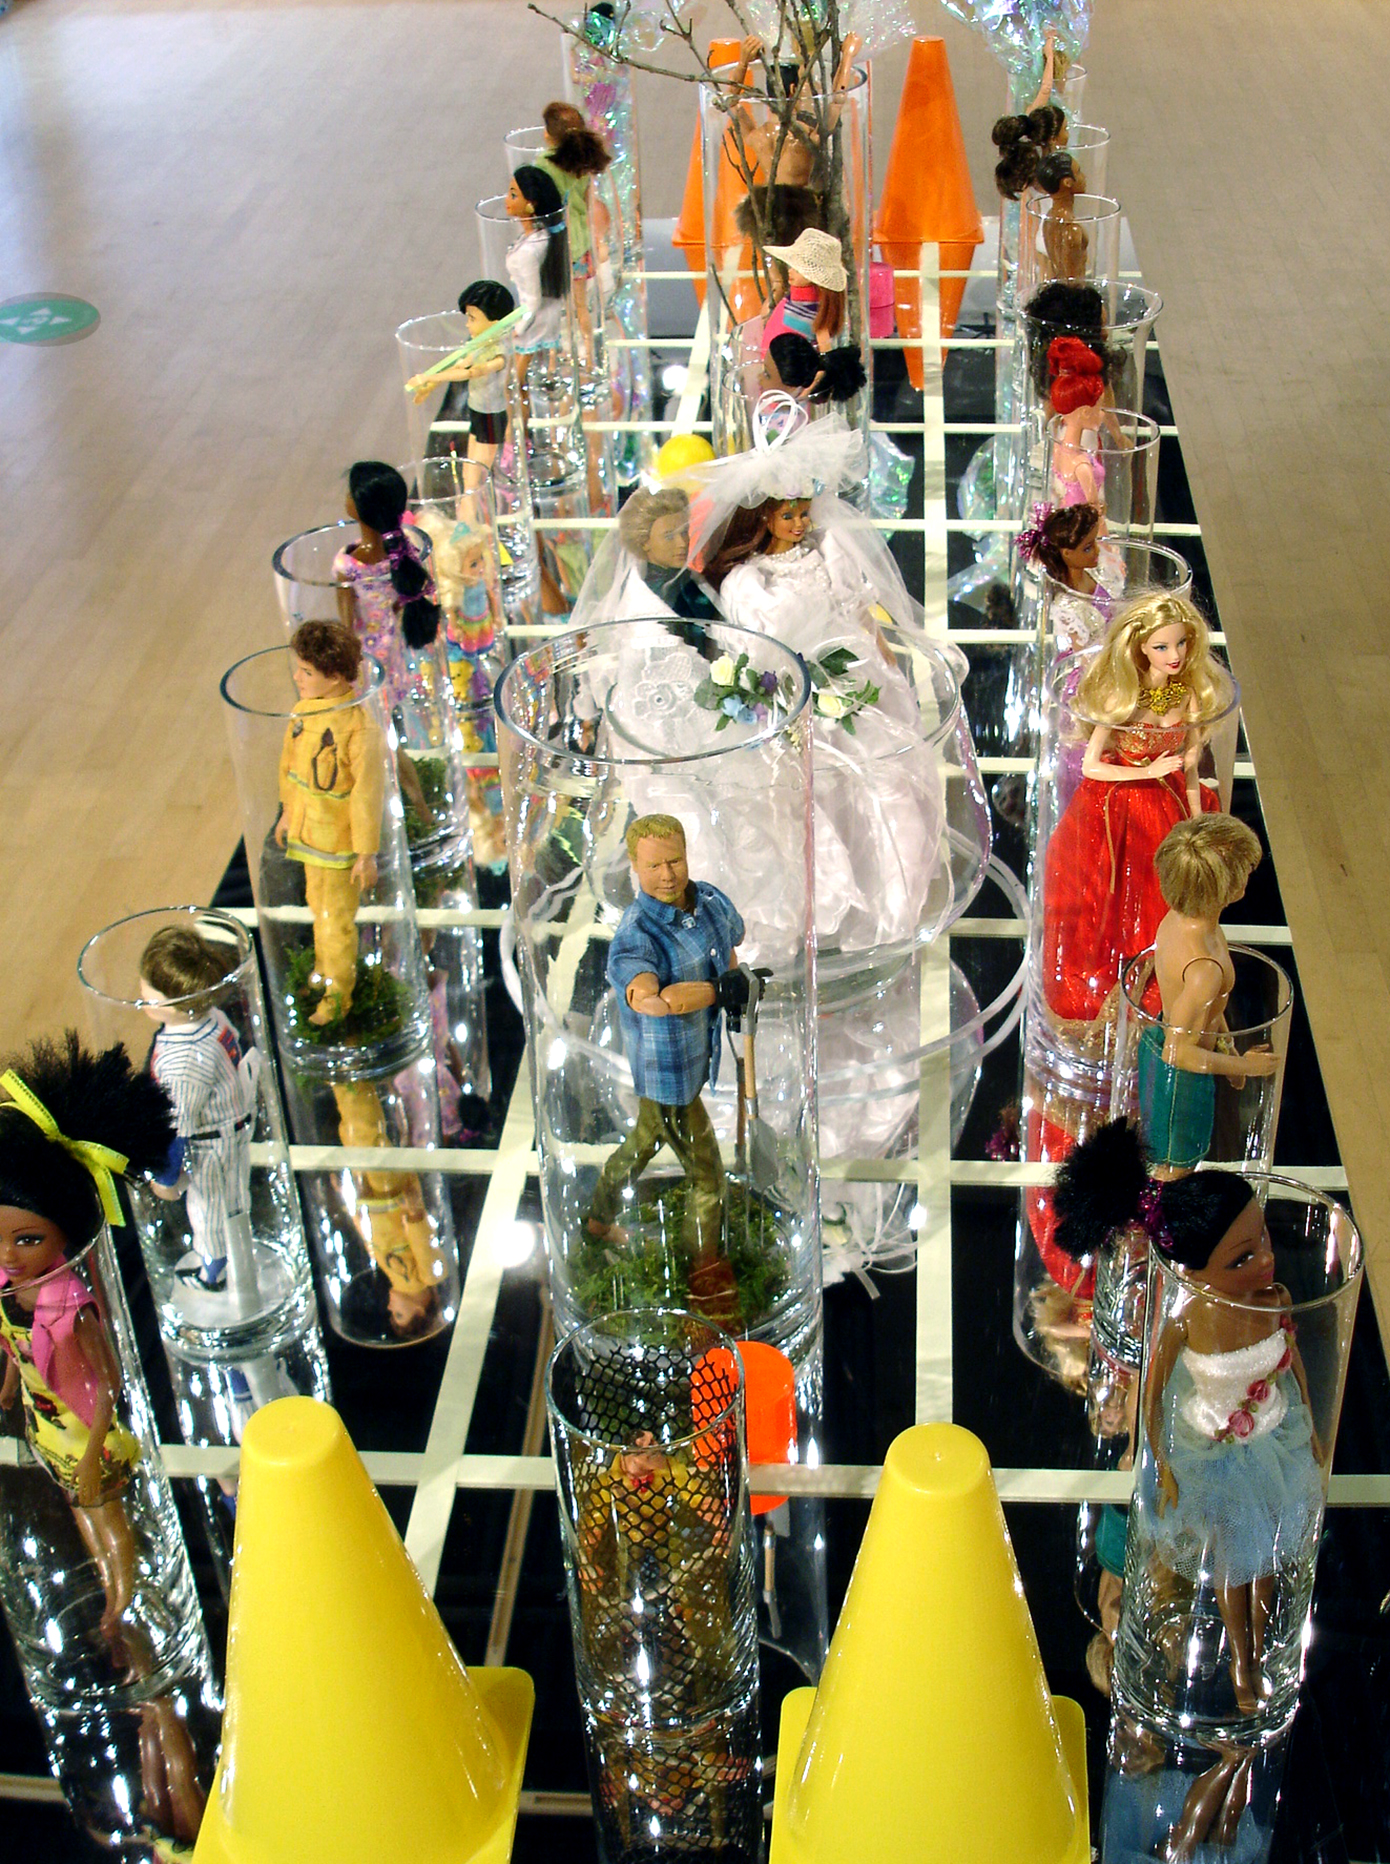 "A New Playing Field" is an installation staging of "Barbie" 12" dolls on an acrylic mirror with a grid of Day-Glo tape to organize placement.  Each doll is in a glass cylinder.